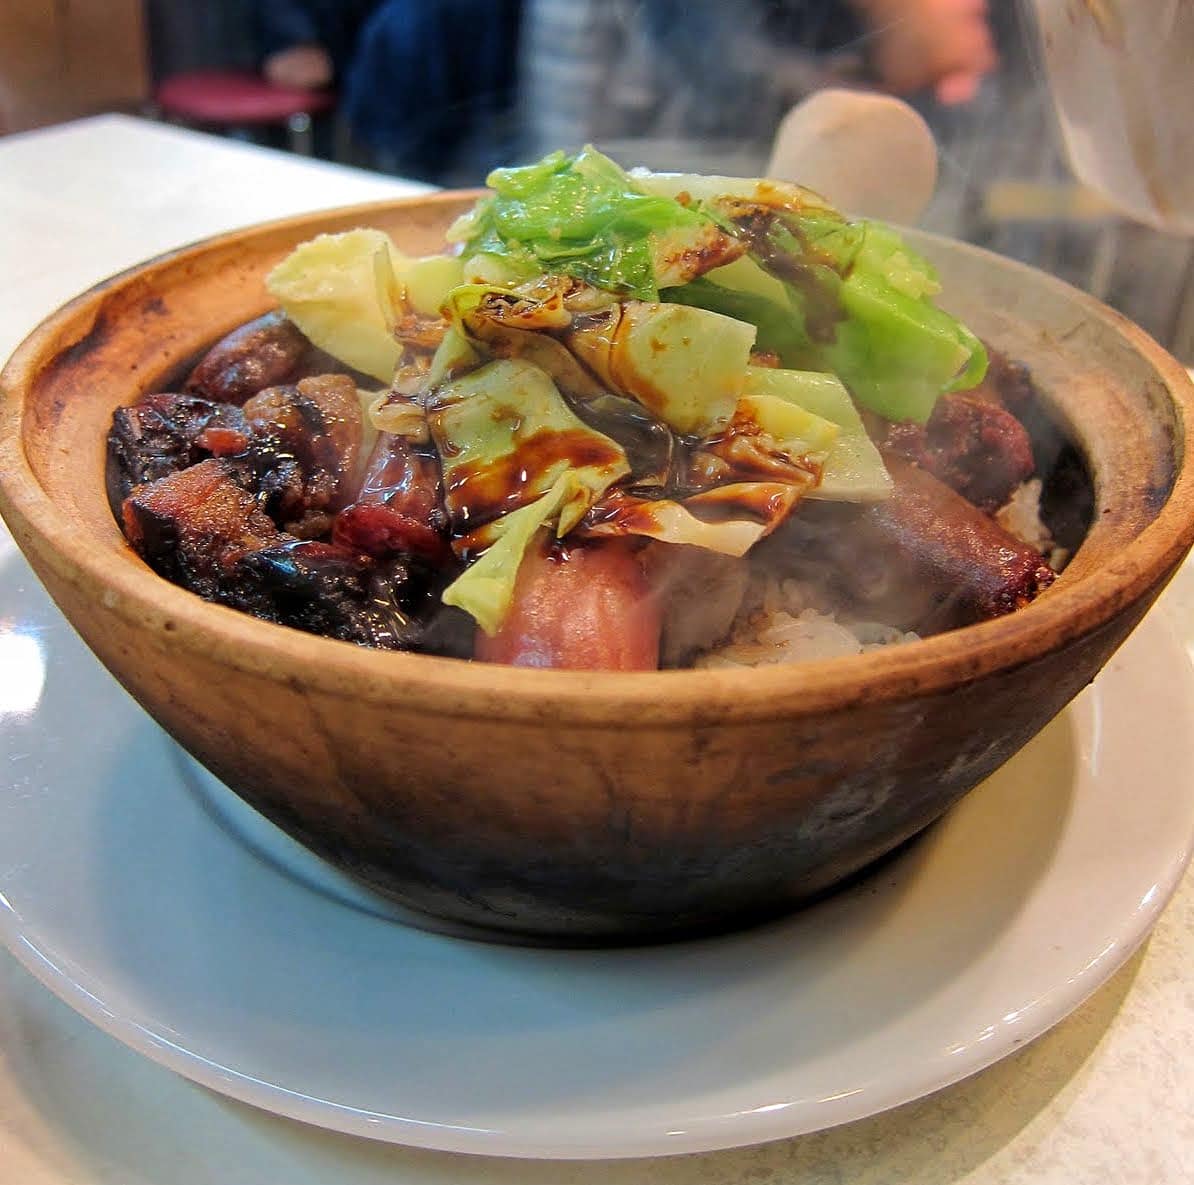 Comfort in a clay pot